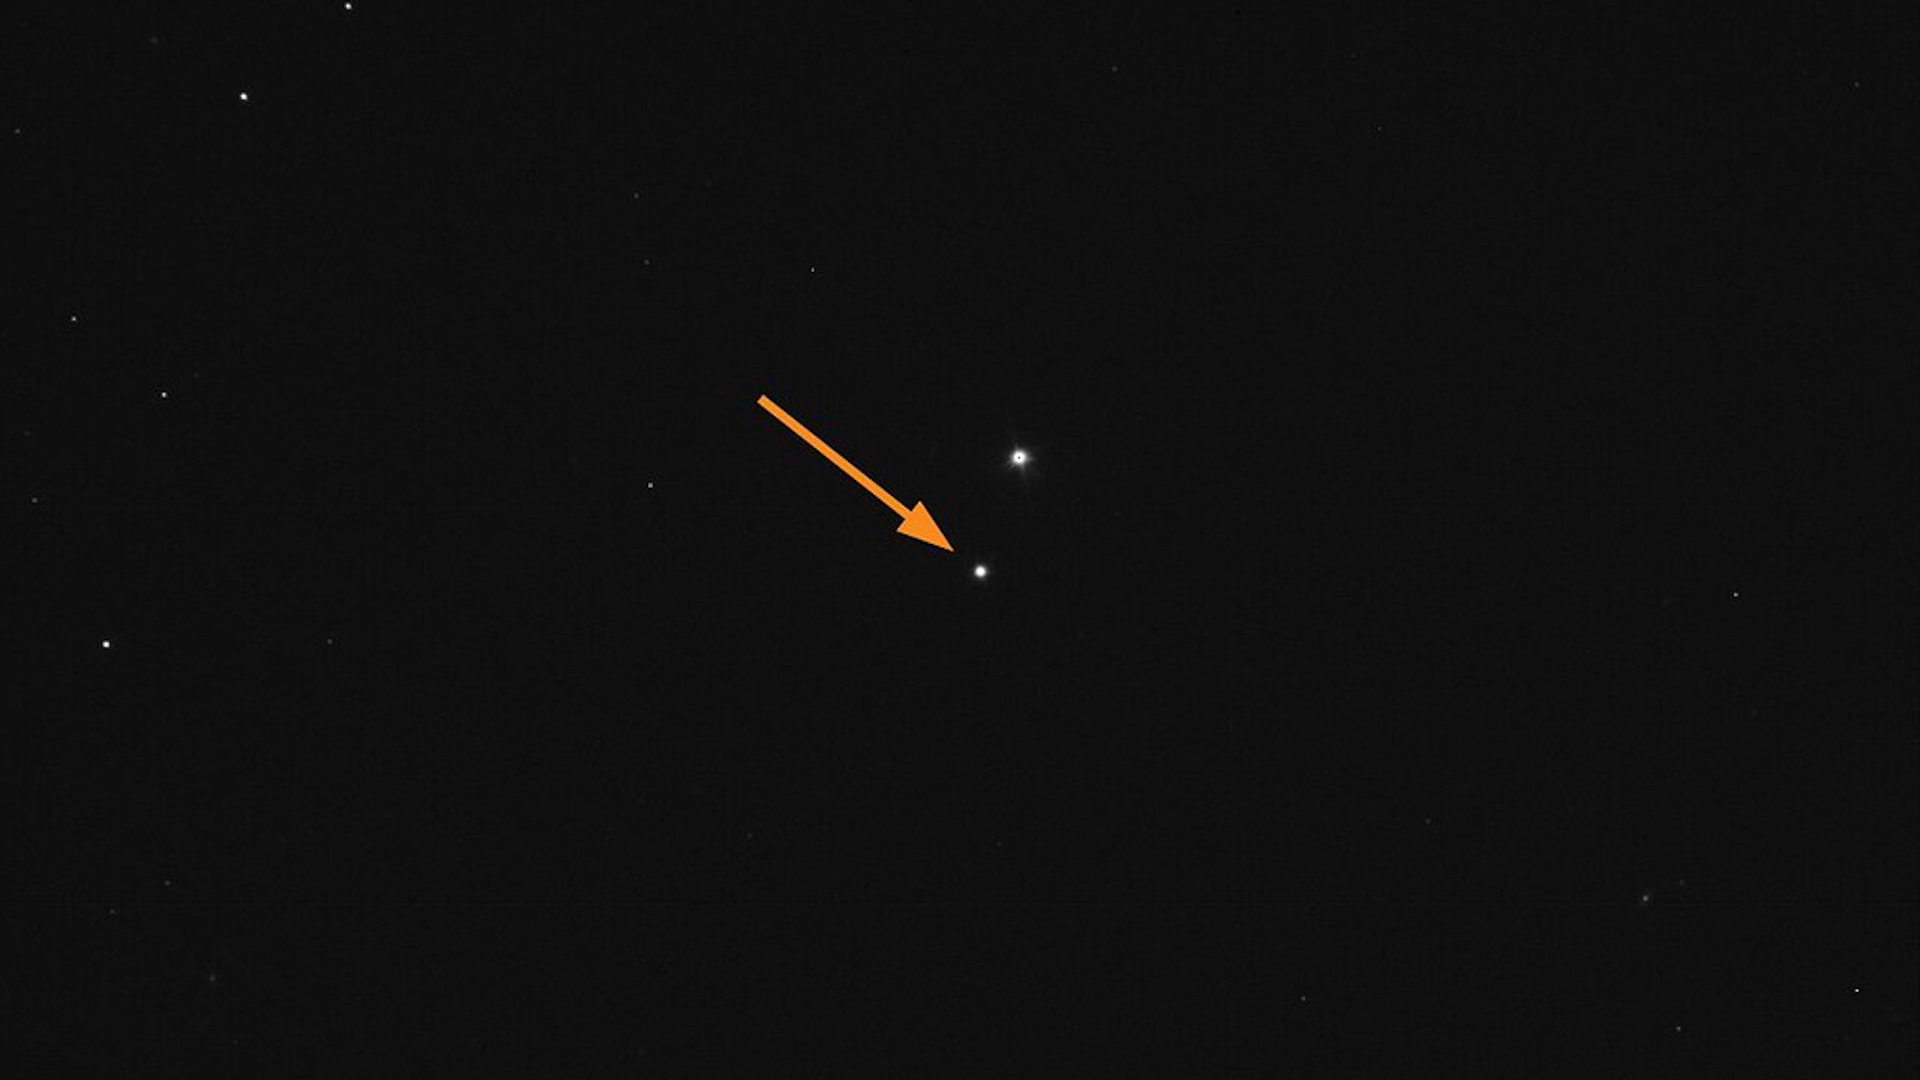 Image showing asteroid Didymos (arrow) against background of stars.